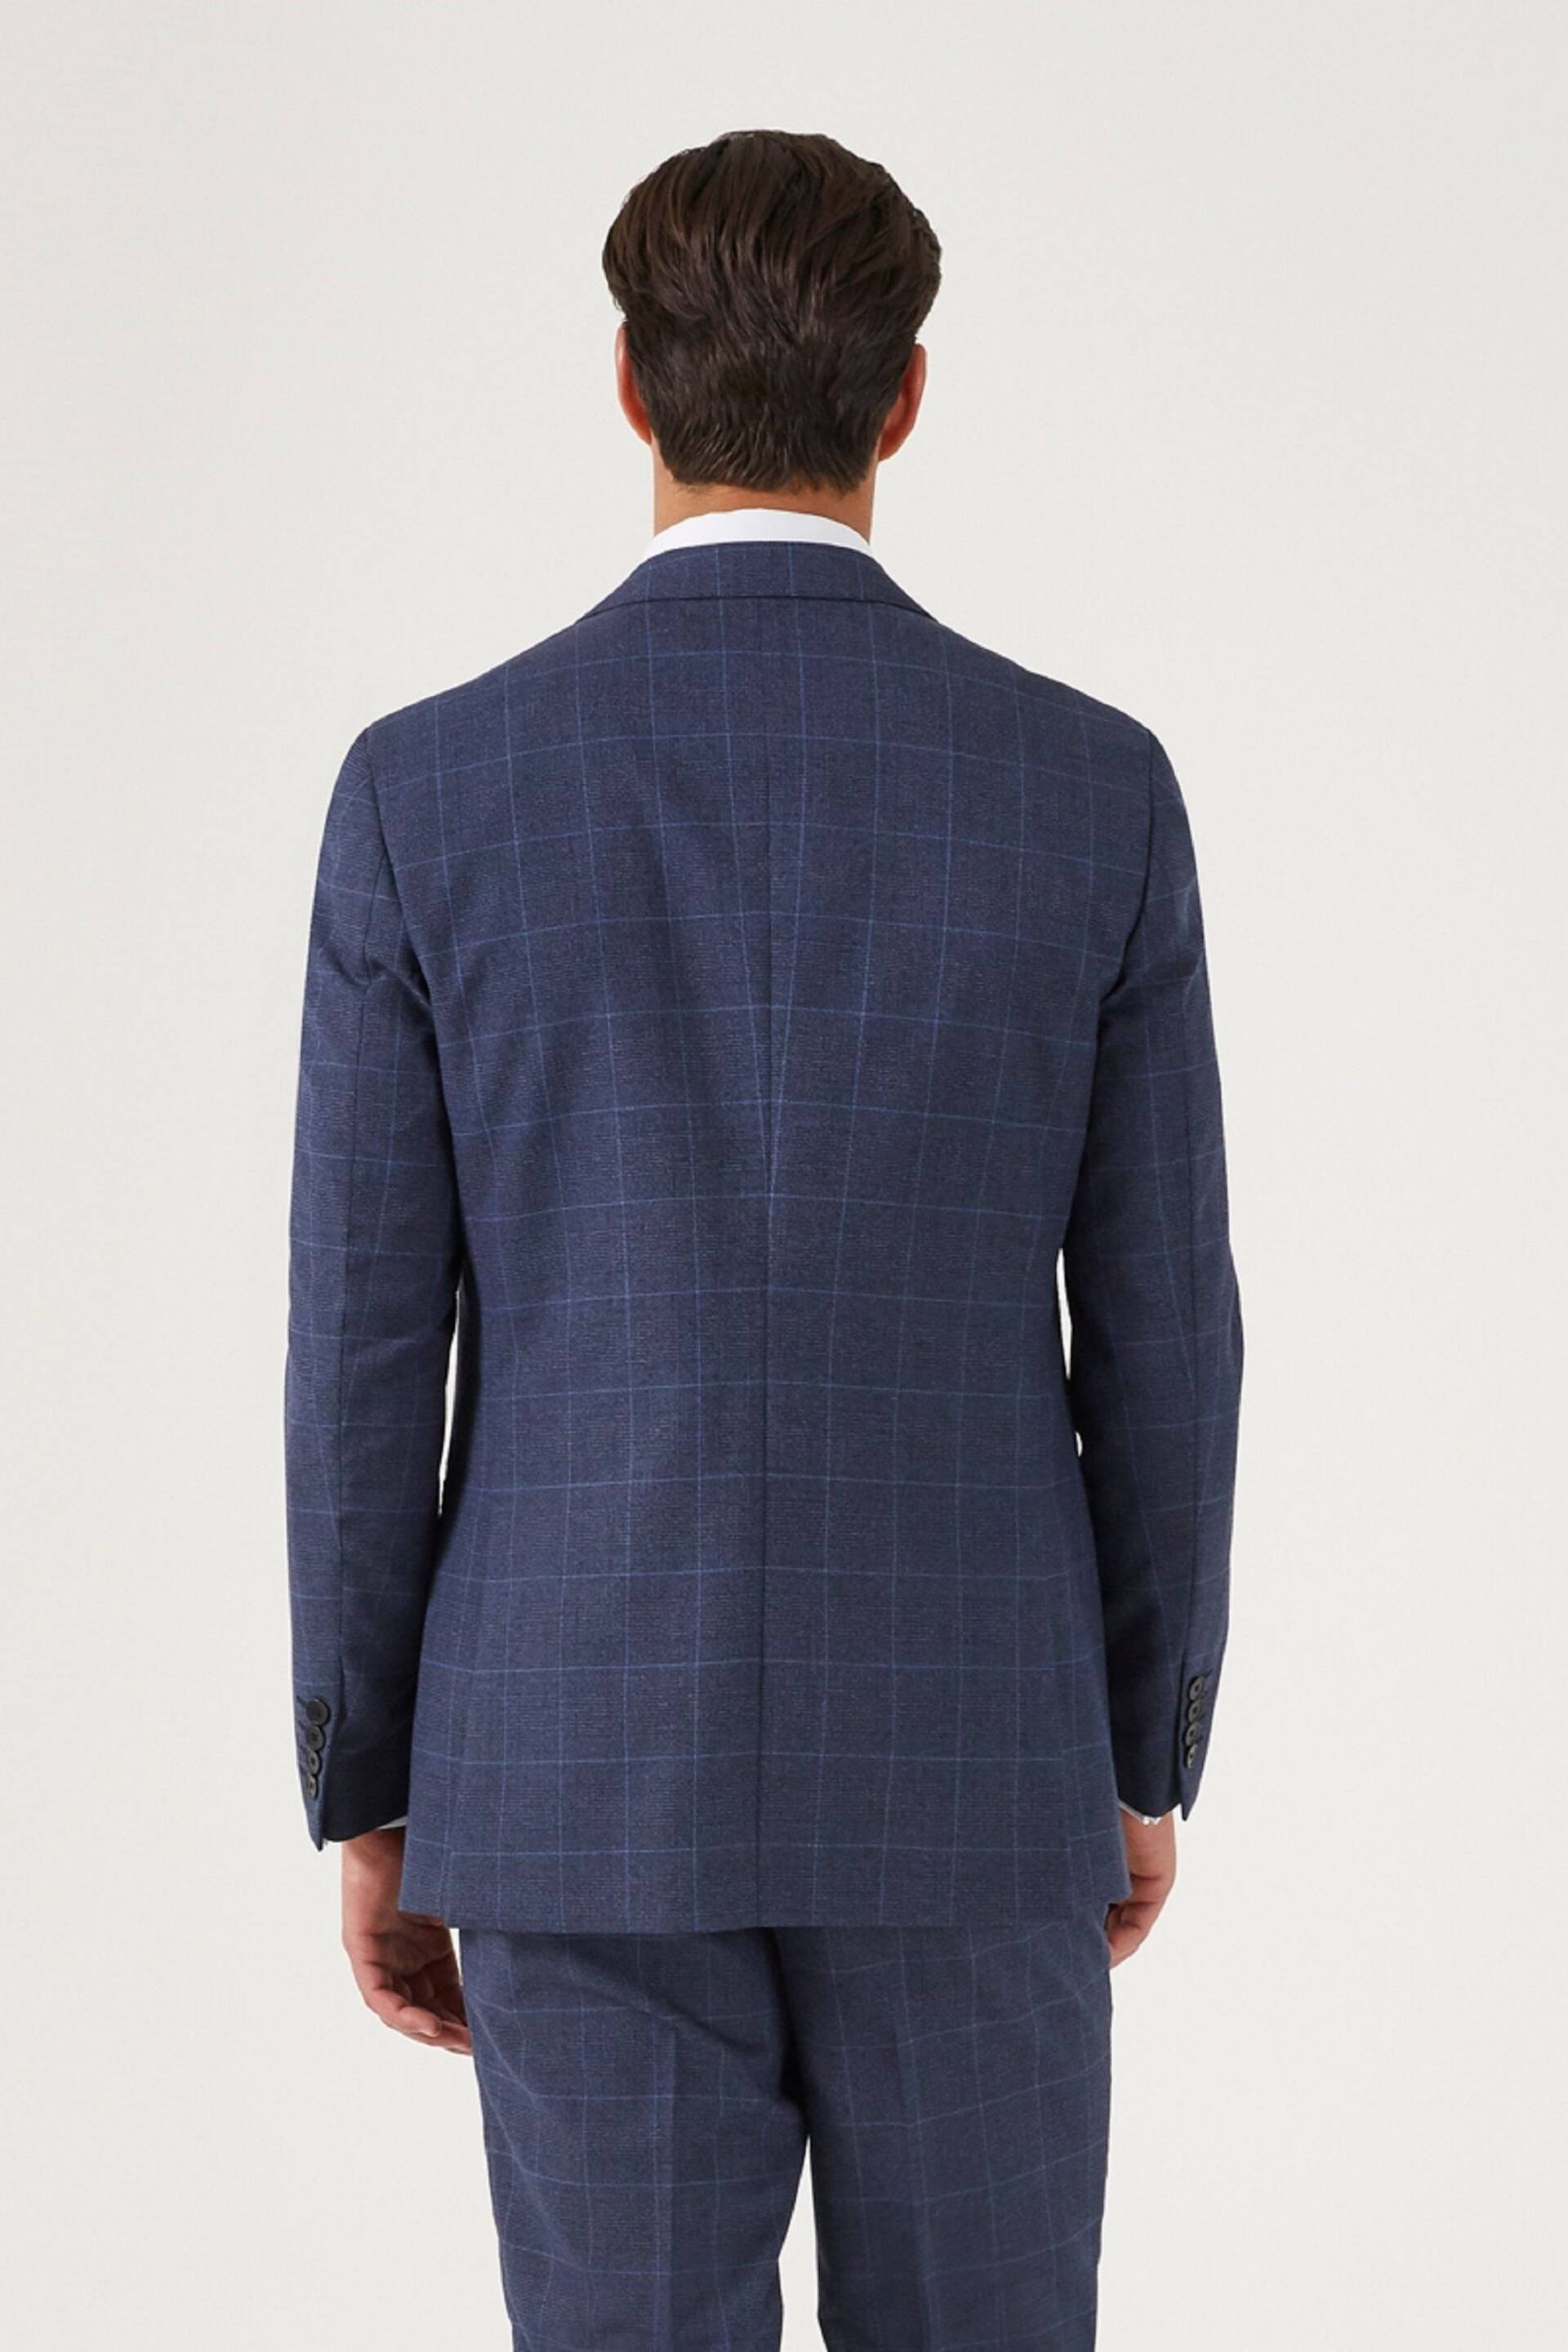 Skopes Anello Check Tailored Fit Suit Jacket - Image 2 of 4